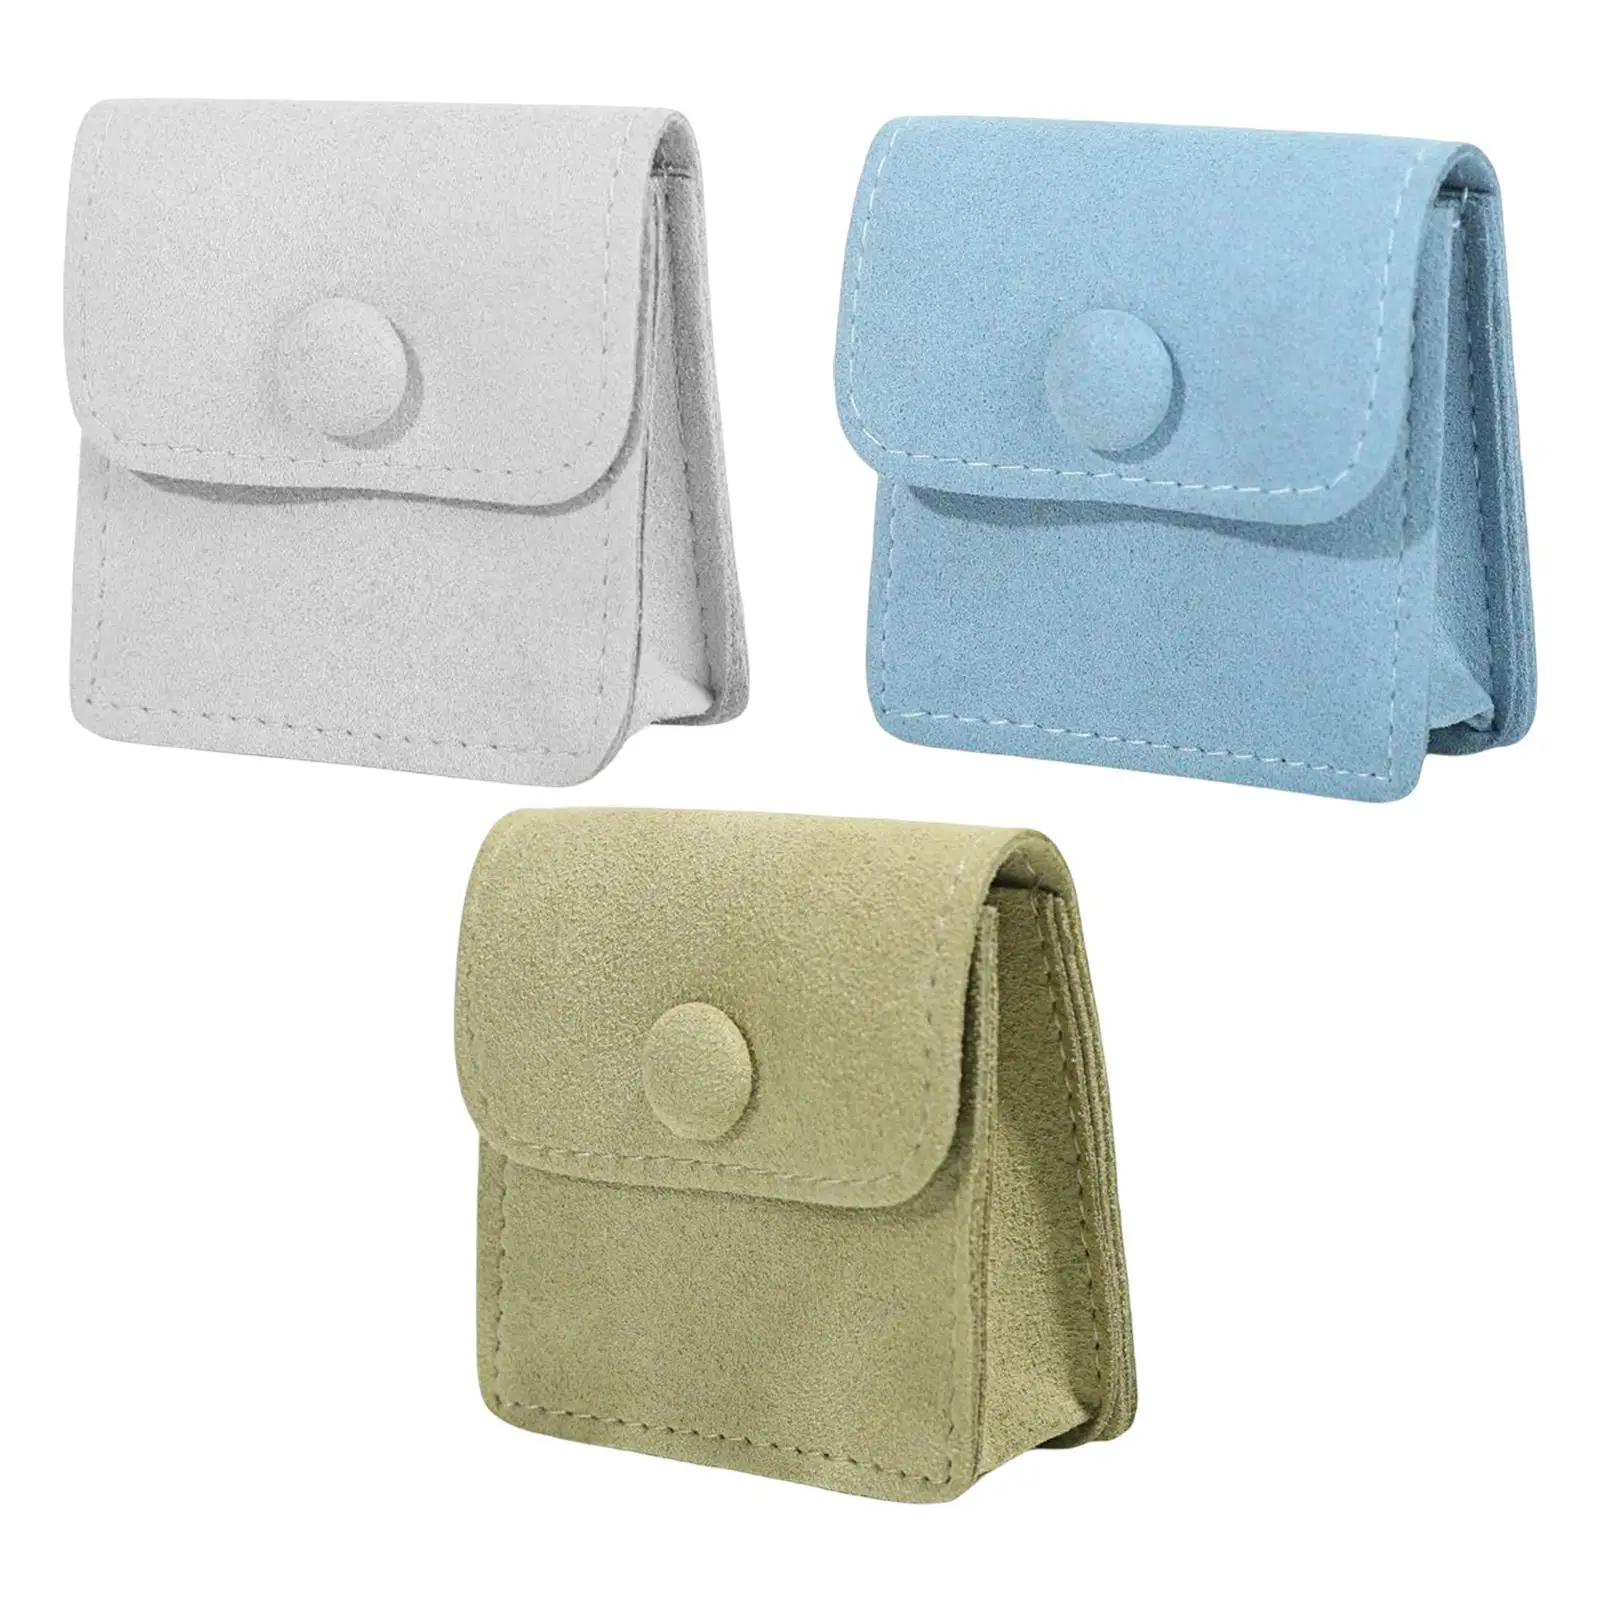 3 Pieces Microfiber Jewelry Pouch Trinket Bag Double Pockets with Snap Button Jewelry Bags for Rings Watch Earrings Gift Travel